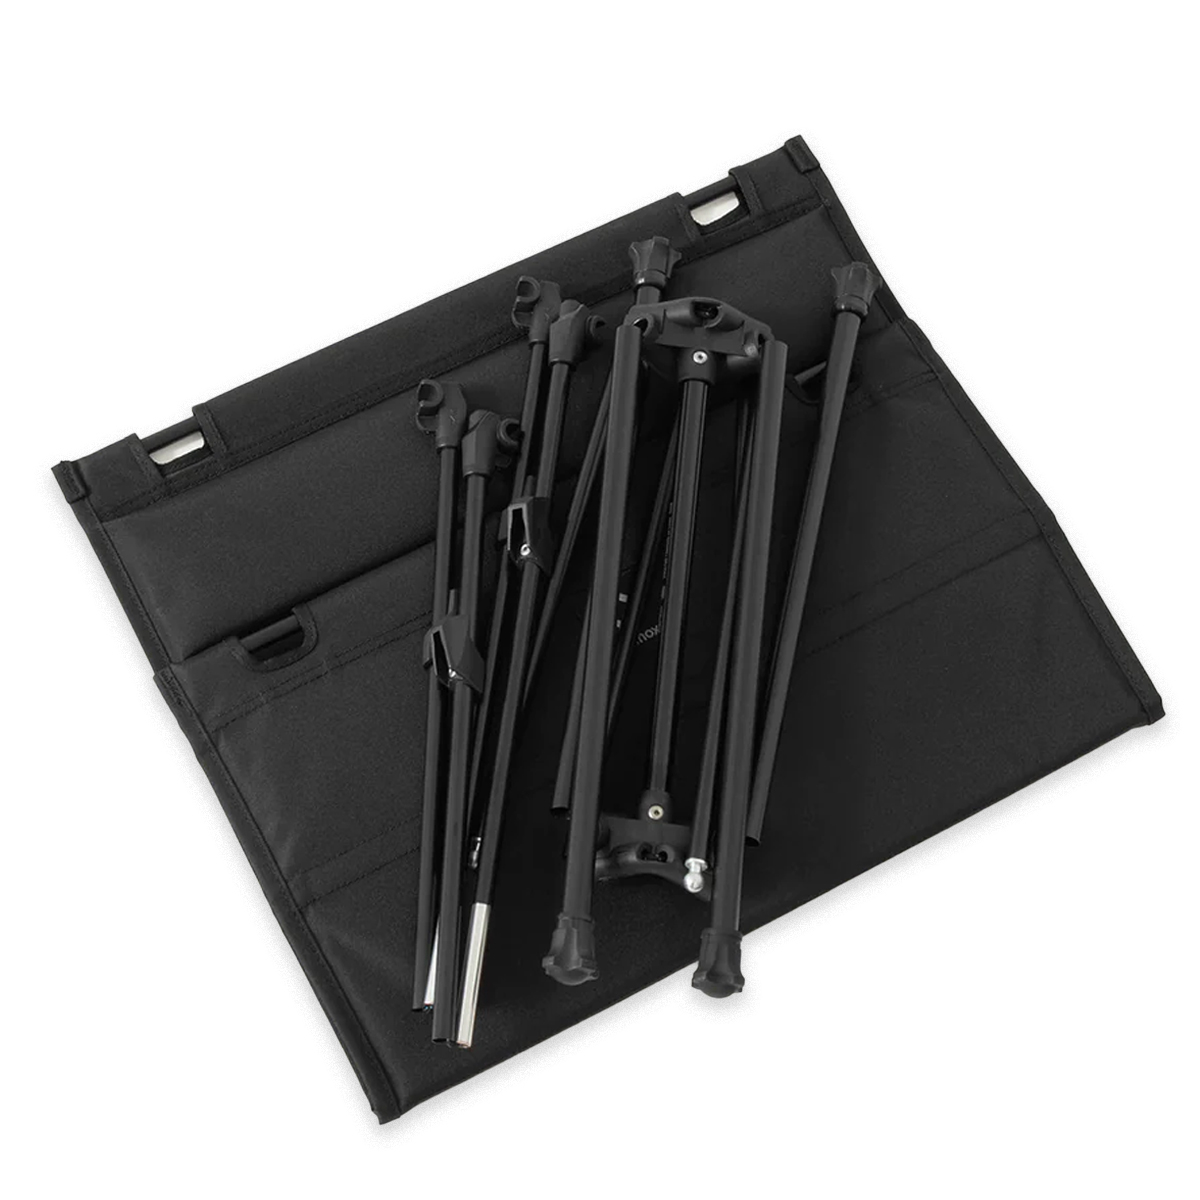 Helinox Tactical Table Regular, lightweight and portable